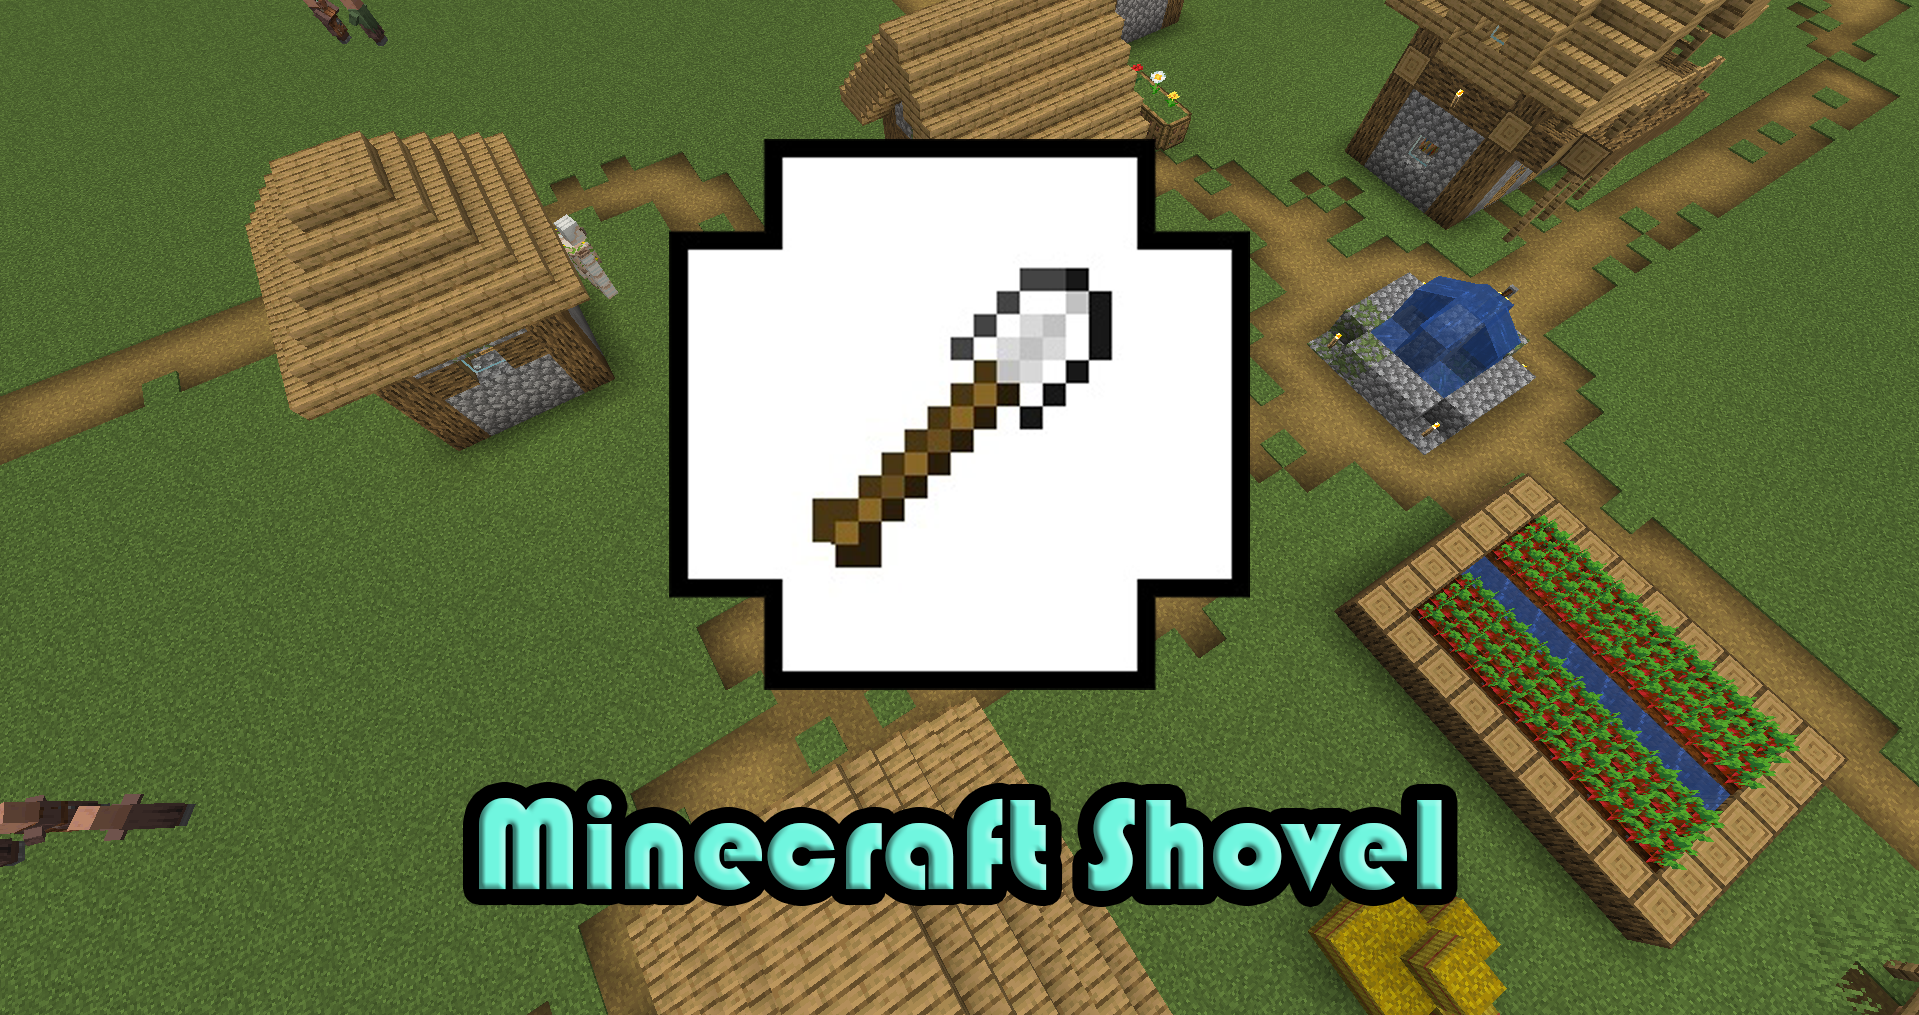 How To Use A Shovel in Minecraft